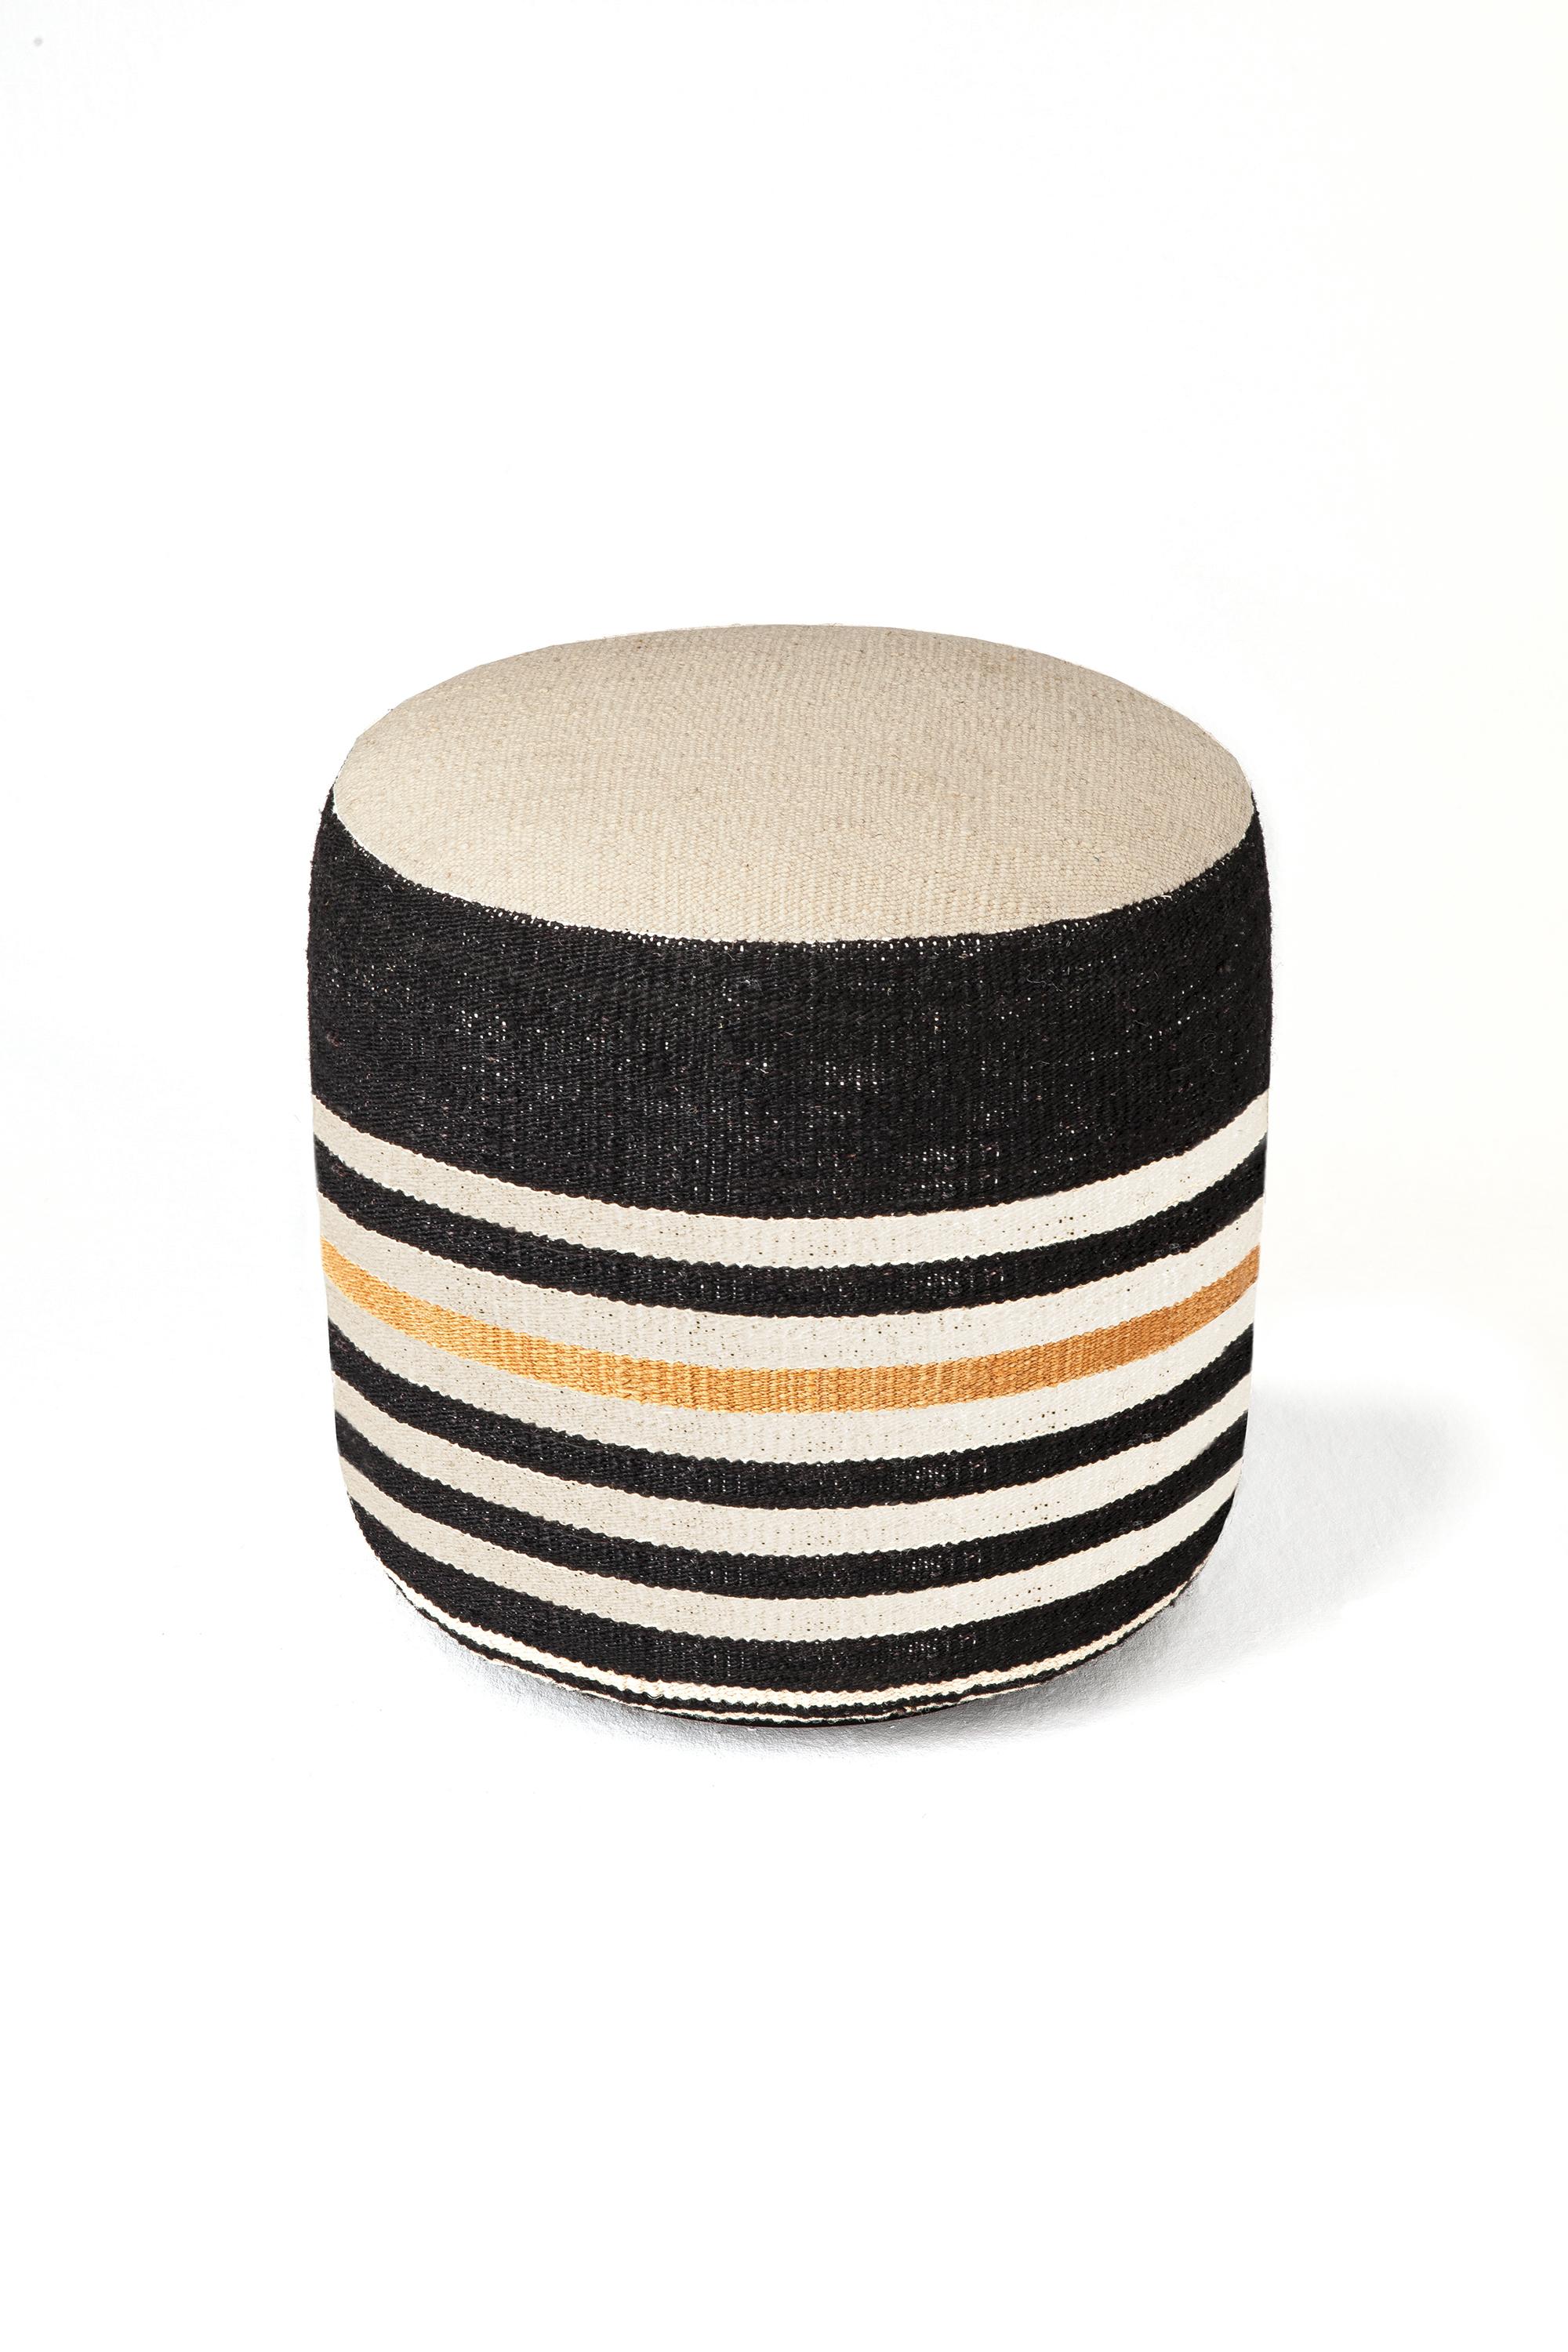 'Kilim 1' Pouf by Nani Marquina and Marcos Catalán for Nanimarquina For Sale 7